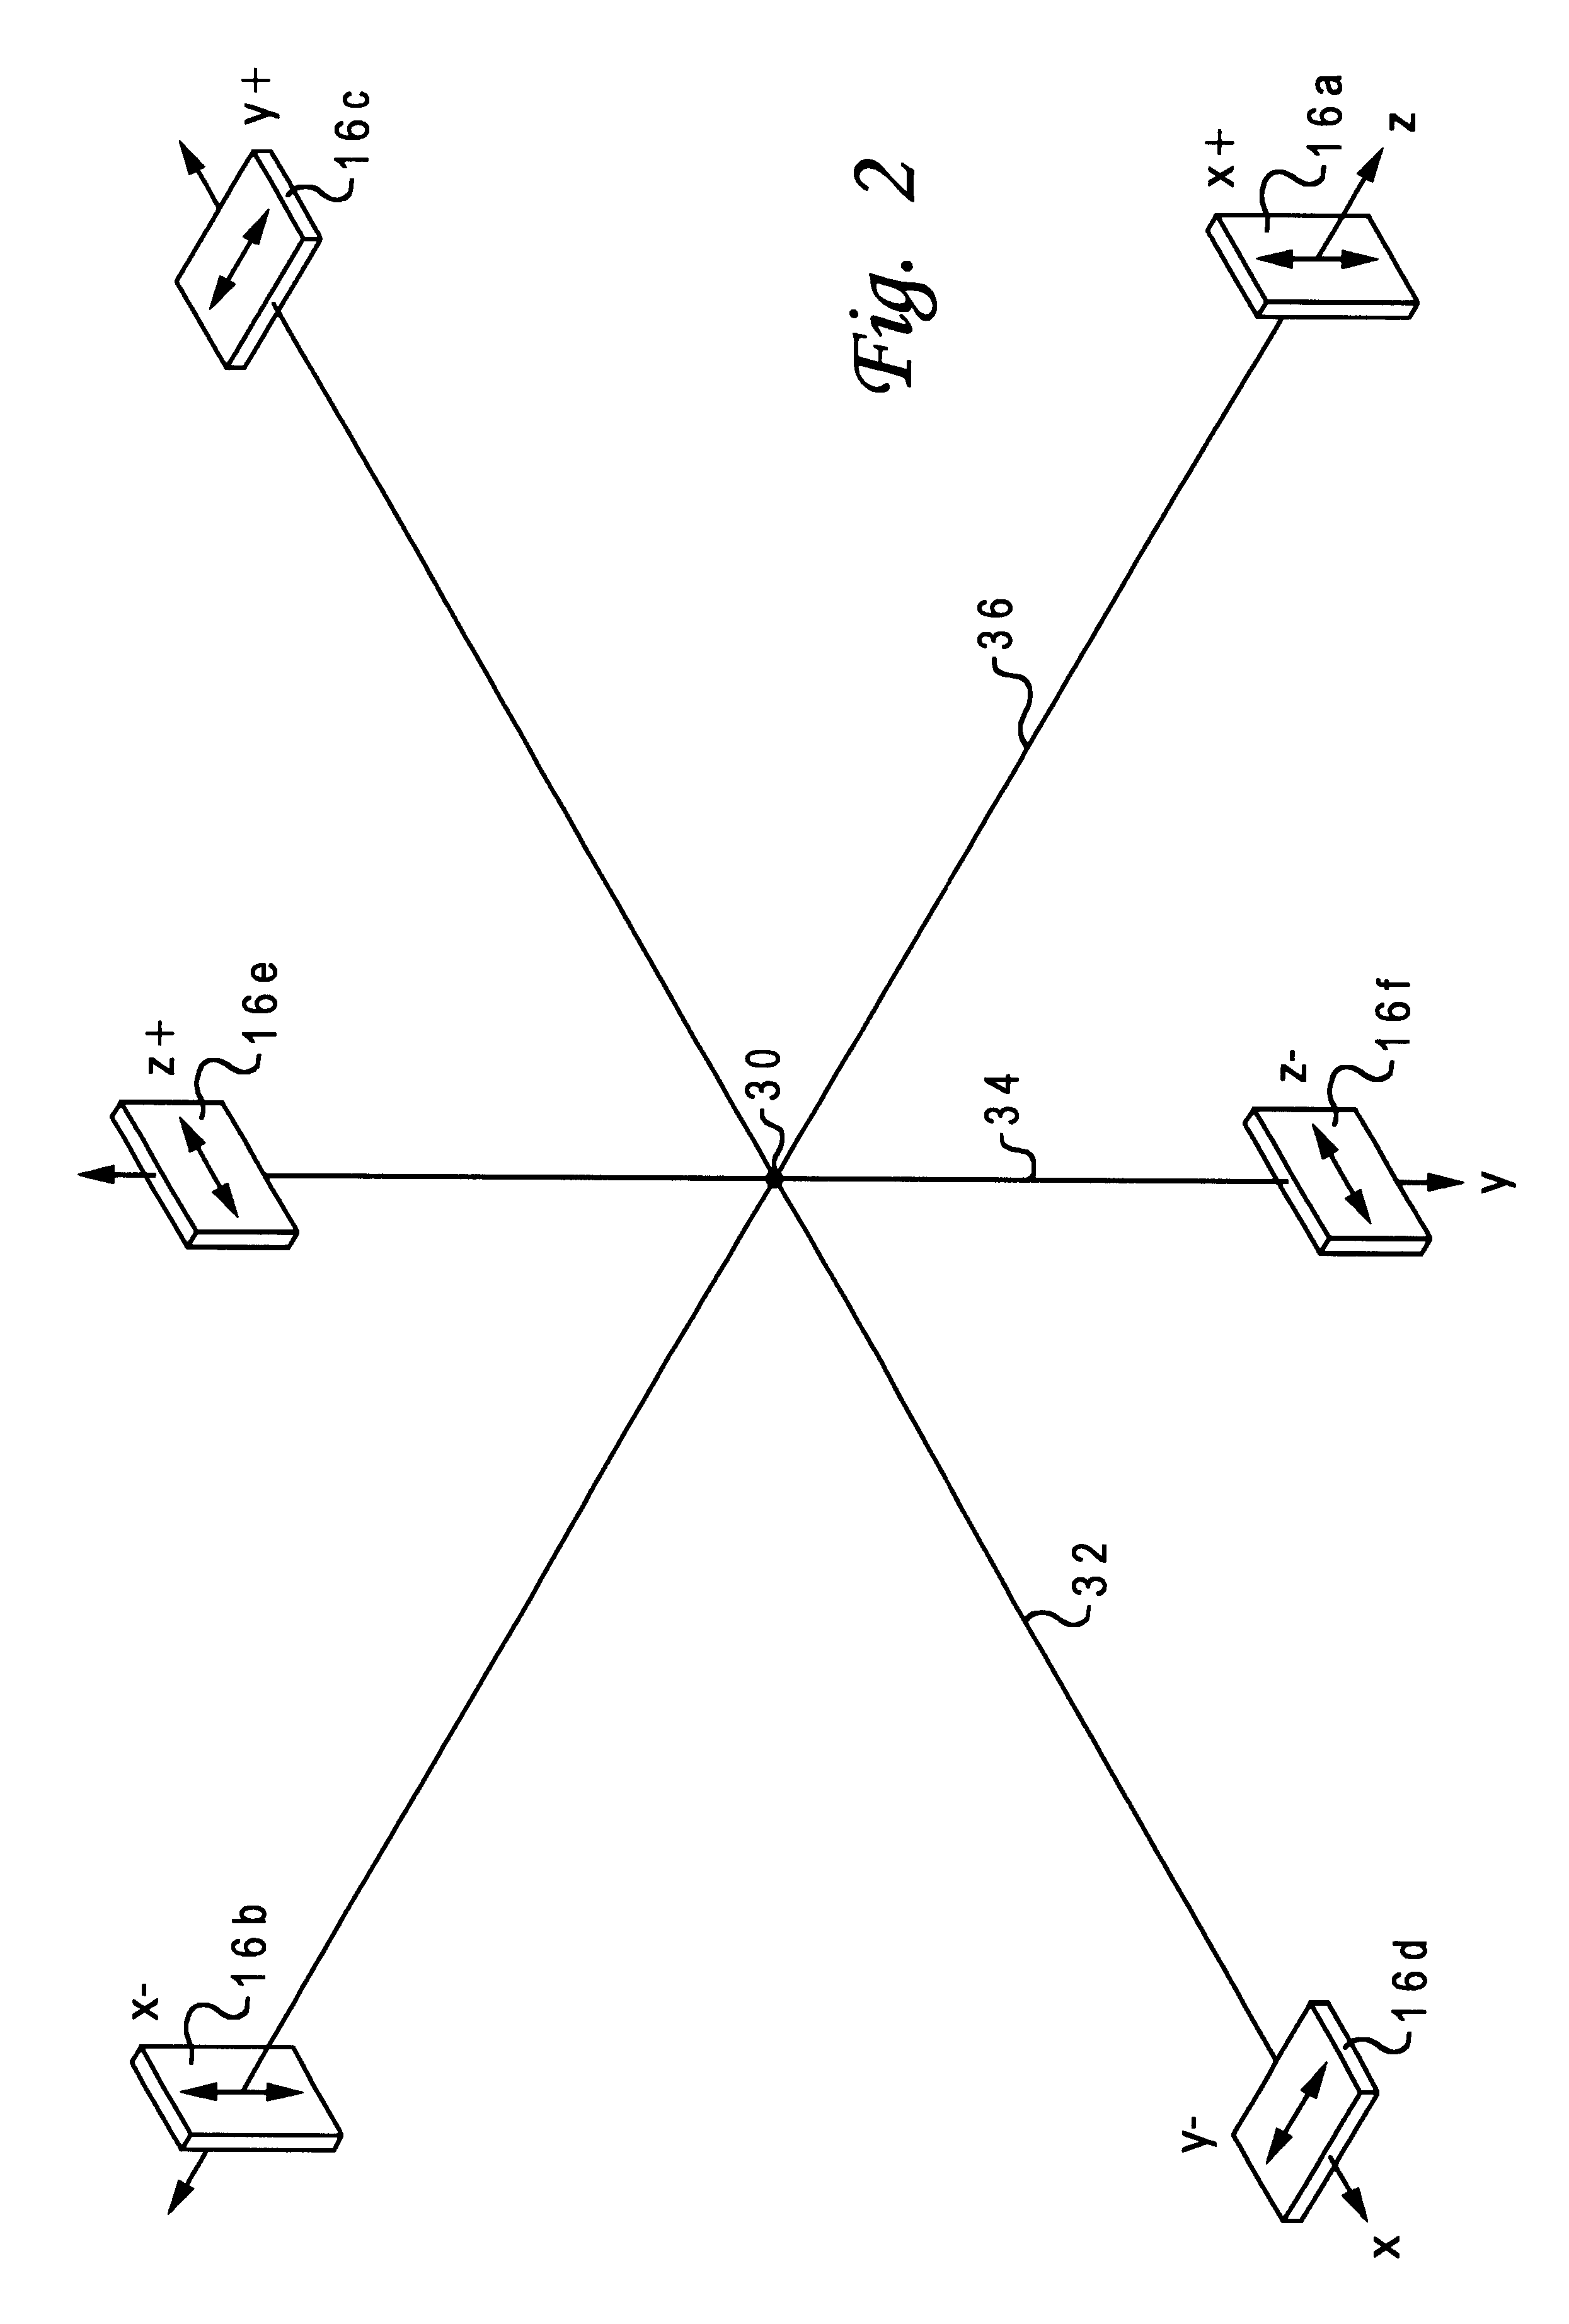 Method and system for determining position information utilizing a portable electronic device lacking global positioning system (GPS) satellite reception capability